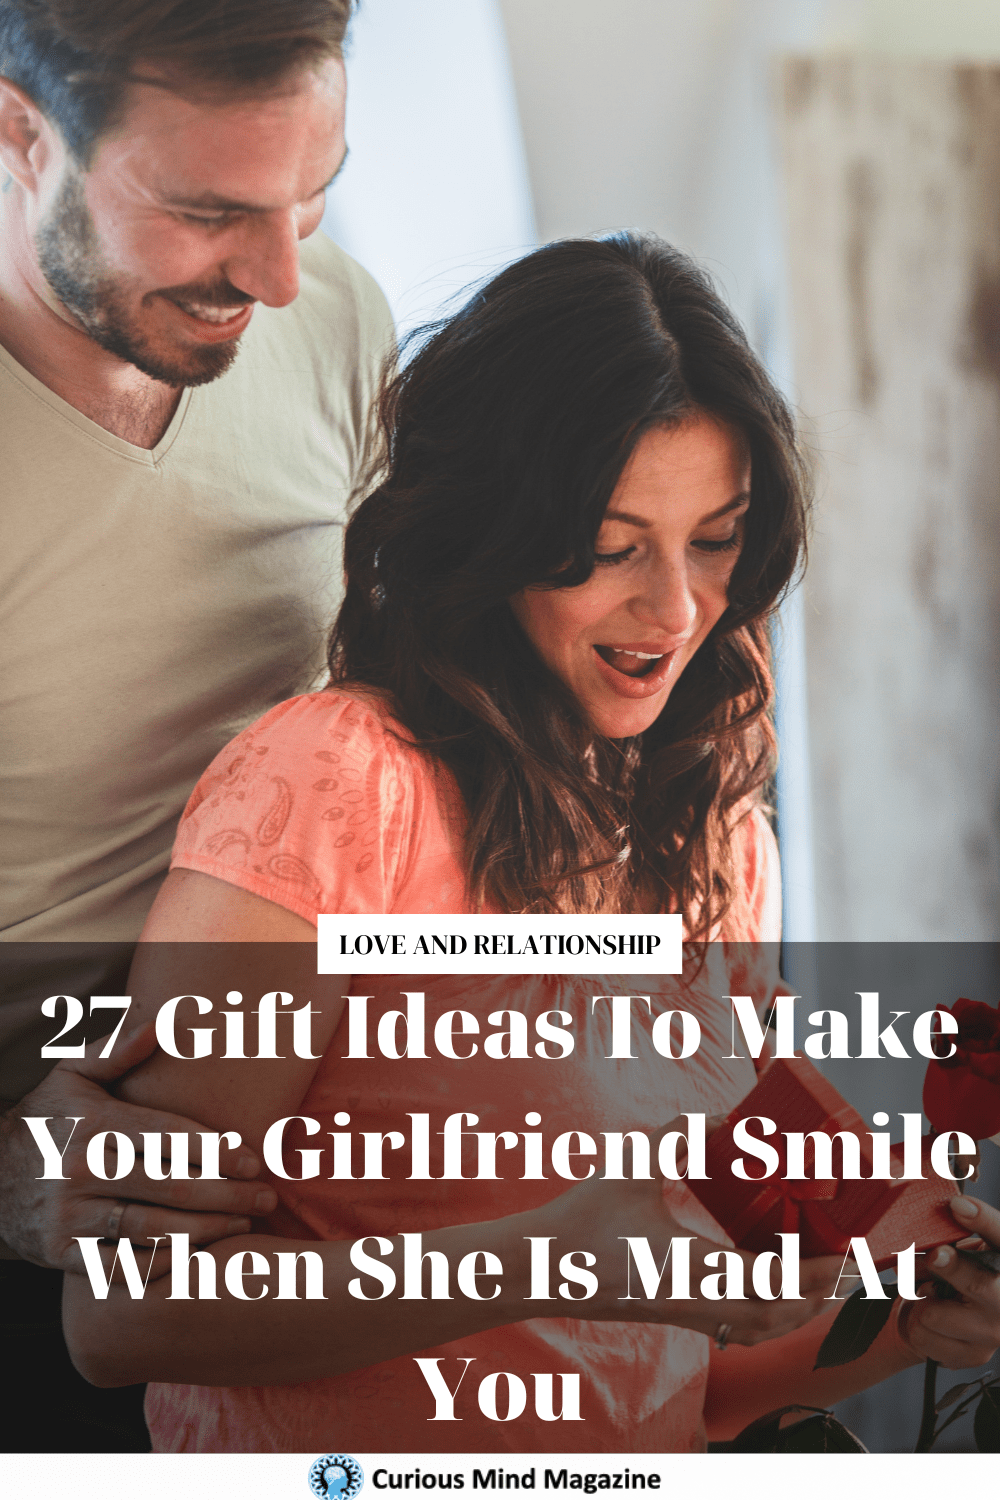 27 Gift Ideas To Make Your Girlfriend Smile When She Is Mad At You